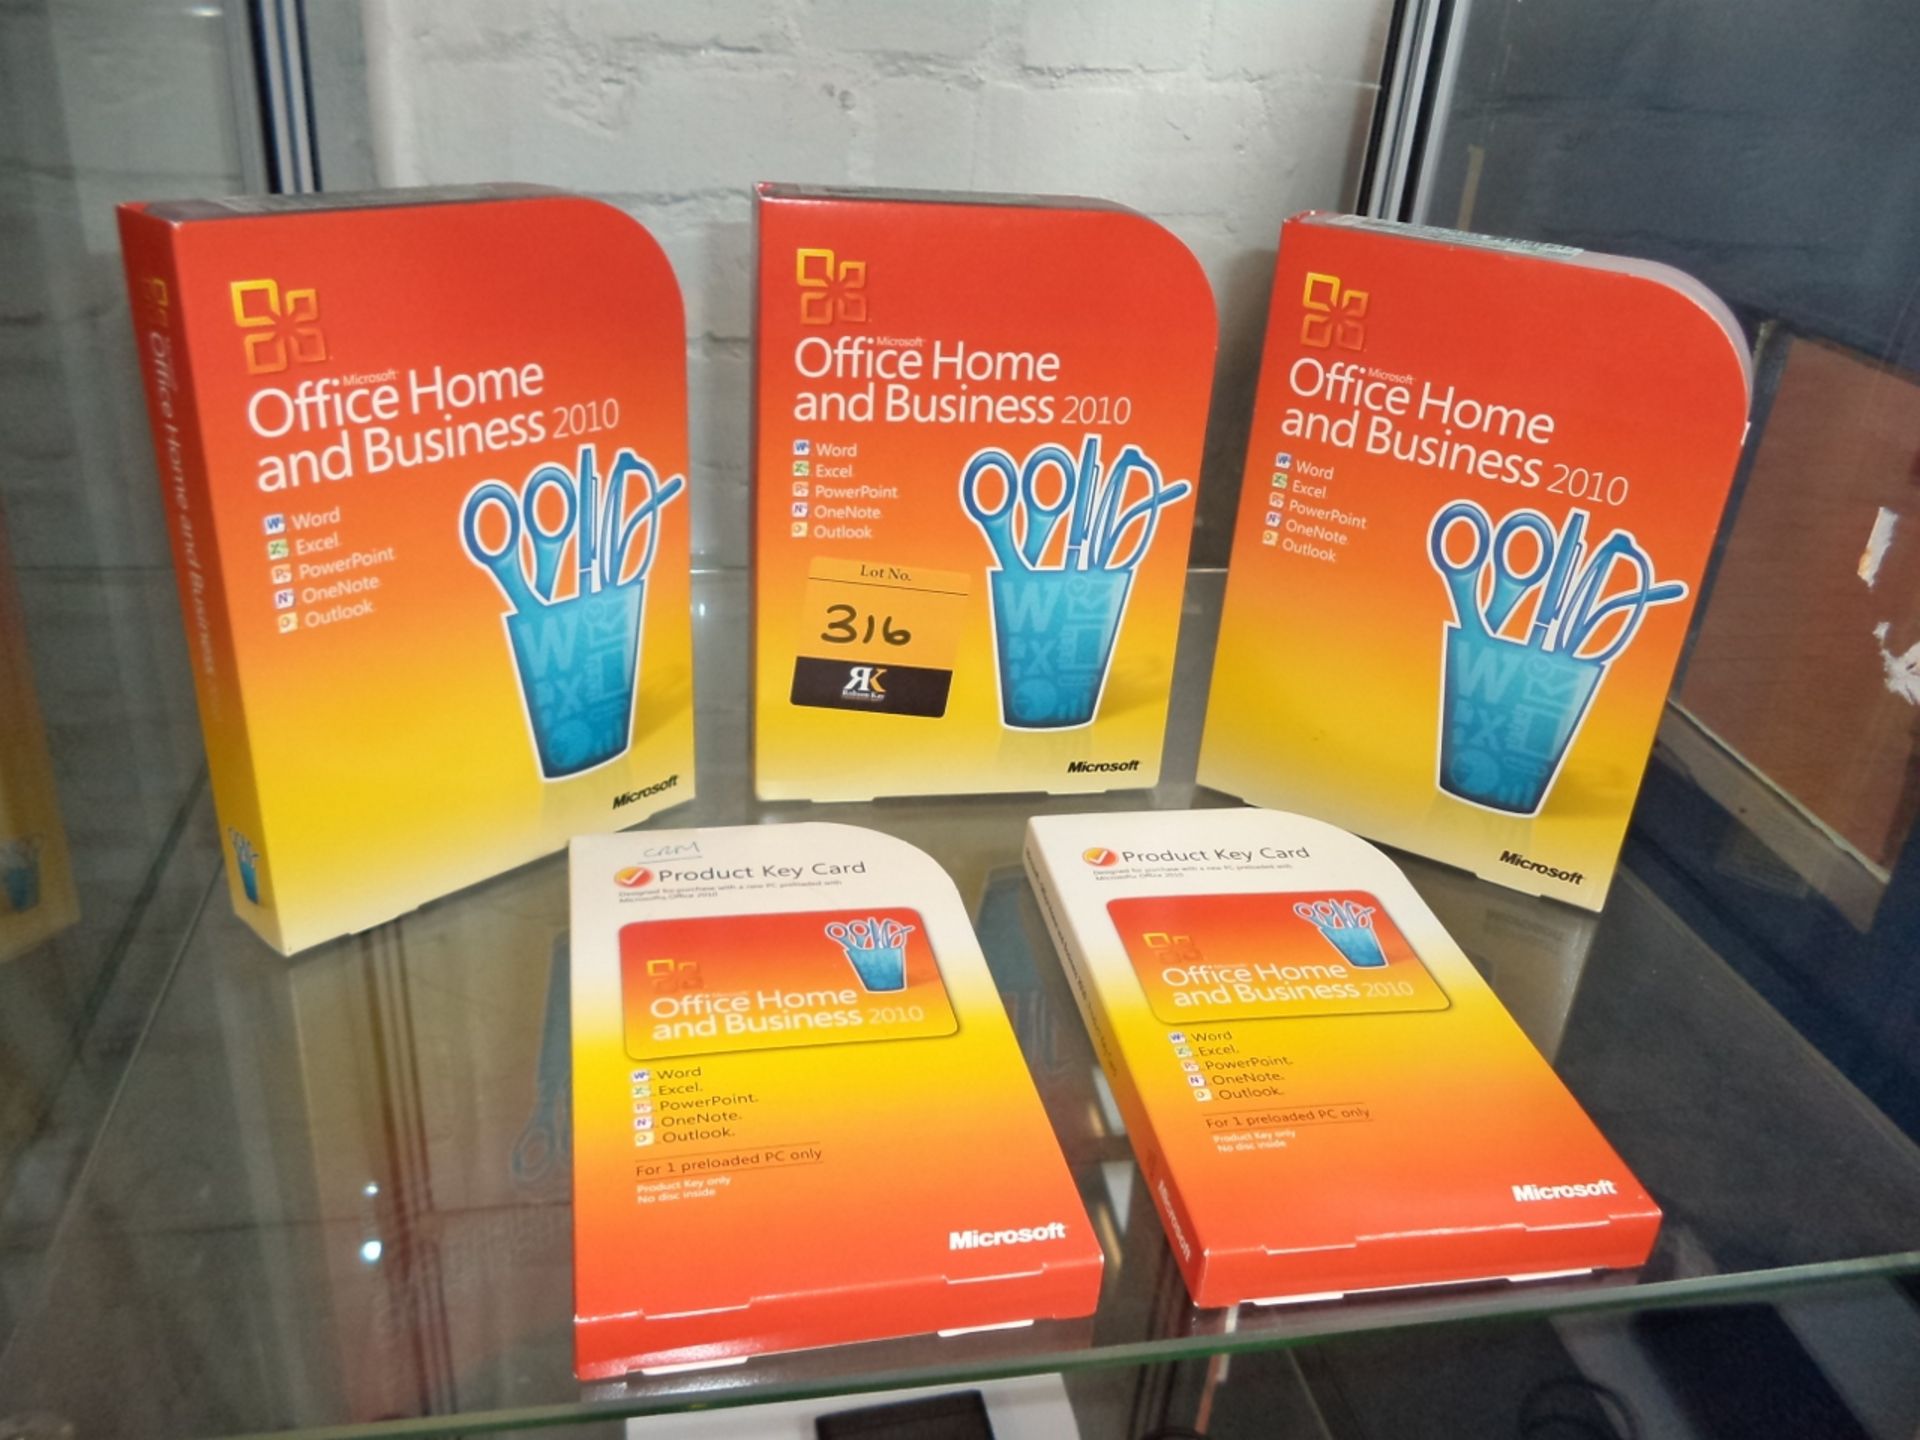 5 off Microsoft Office Home & Business 2010 software packs, 3 of which consist of larger boxes which